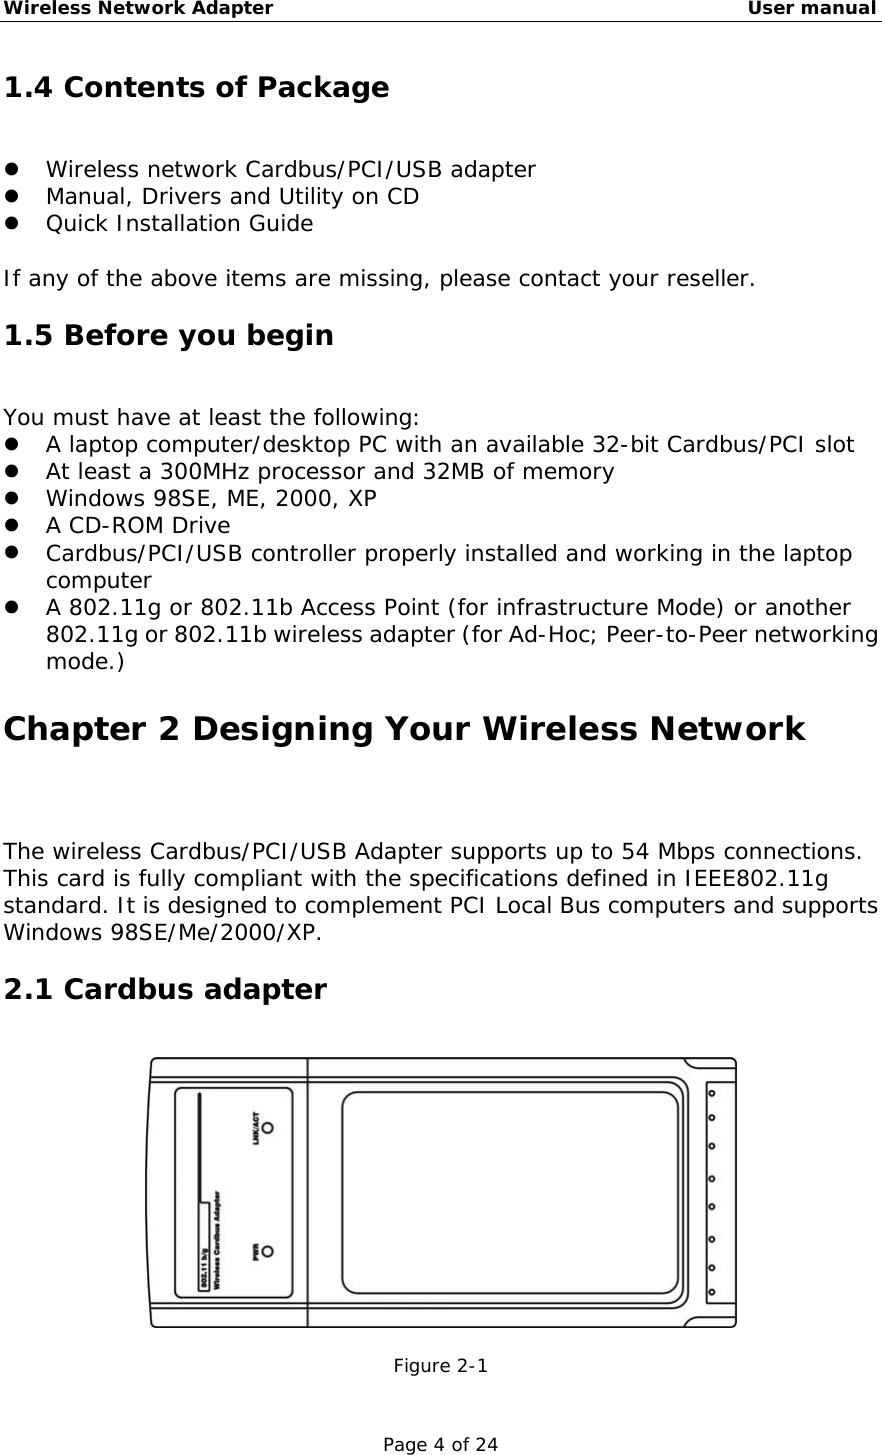 Wireless Network Adapter                                                    User manual Page 4 of 24 1.4 Contents of Package   Wireless network Cardbus/PCI/USB adapter   Manual, Drivers and Utility on CD   Quick Installation Guide  If any of the above items are missing, please contact your reseller. 1.5 Before you begin You must have at least the following:   A laptop computer/desktop PC with an available 32-bit Cardbus/PCI slot   At least a 300MHz processor and 32MB of memory   Windows 98SE, ME, 2000, XP   A CD-ROM Drive   Cardbus/PCI/USB controller properly installed and working in the laptop computer   A 802.11g or 802.11b Access Point (for infrastructure Mode) or another 802.11g or 802.11b wireless adapter (for Ad-Hoc; Peer-to-Peer networking mode.) Chapter 2 Designing Your Wireless Network The wireless Cardbus/PCI/USB Adapter supports up to 54 Mbps connections. This card is fully compliant with the specifications defined in IEEE802.11g standard. It is designed to complement PCI Local Bus computers and supports Windows 98SE/Me/2000/XP. 2.1 Cardbus adapter   Figure 2-1 